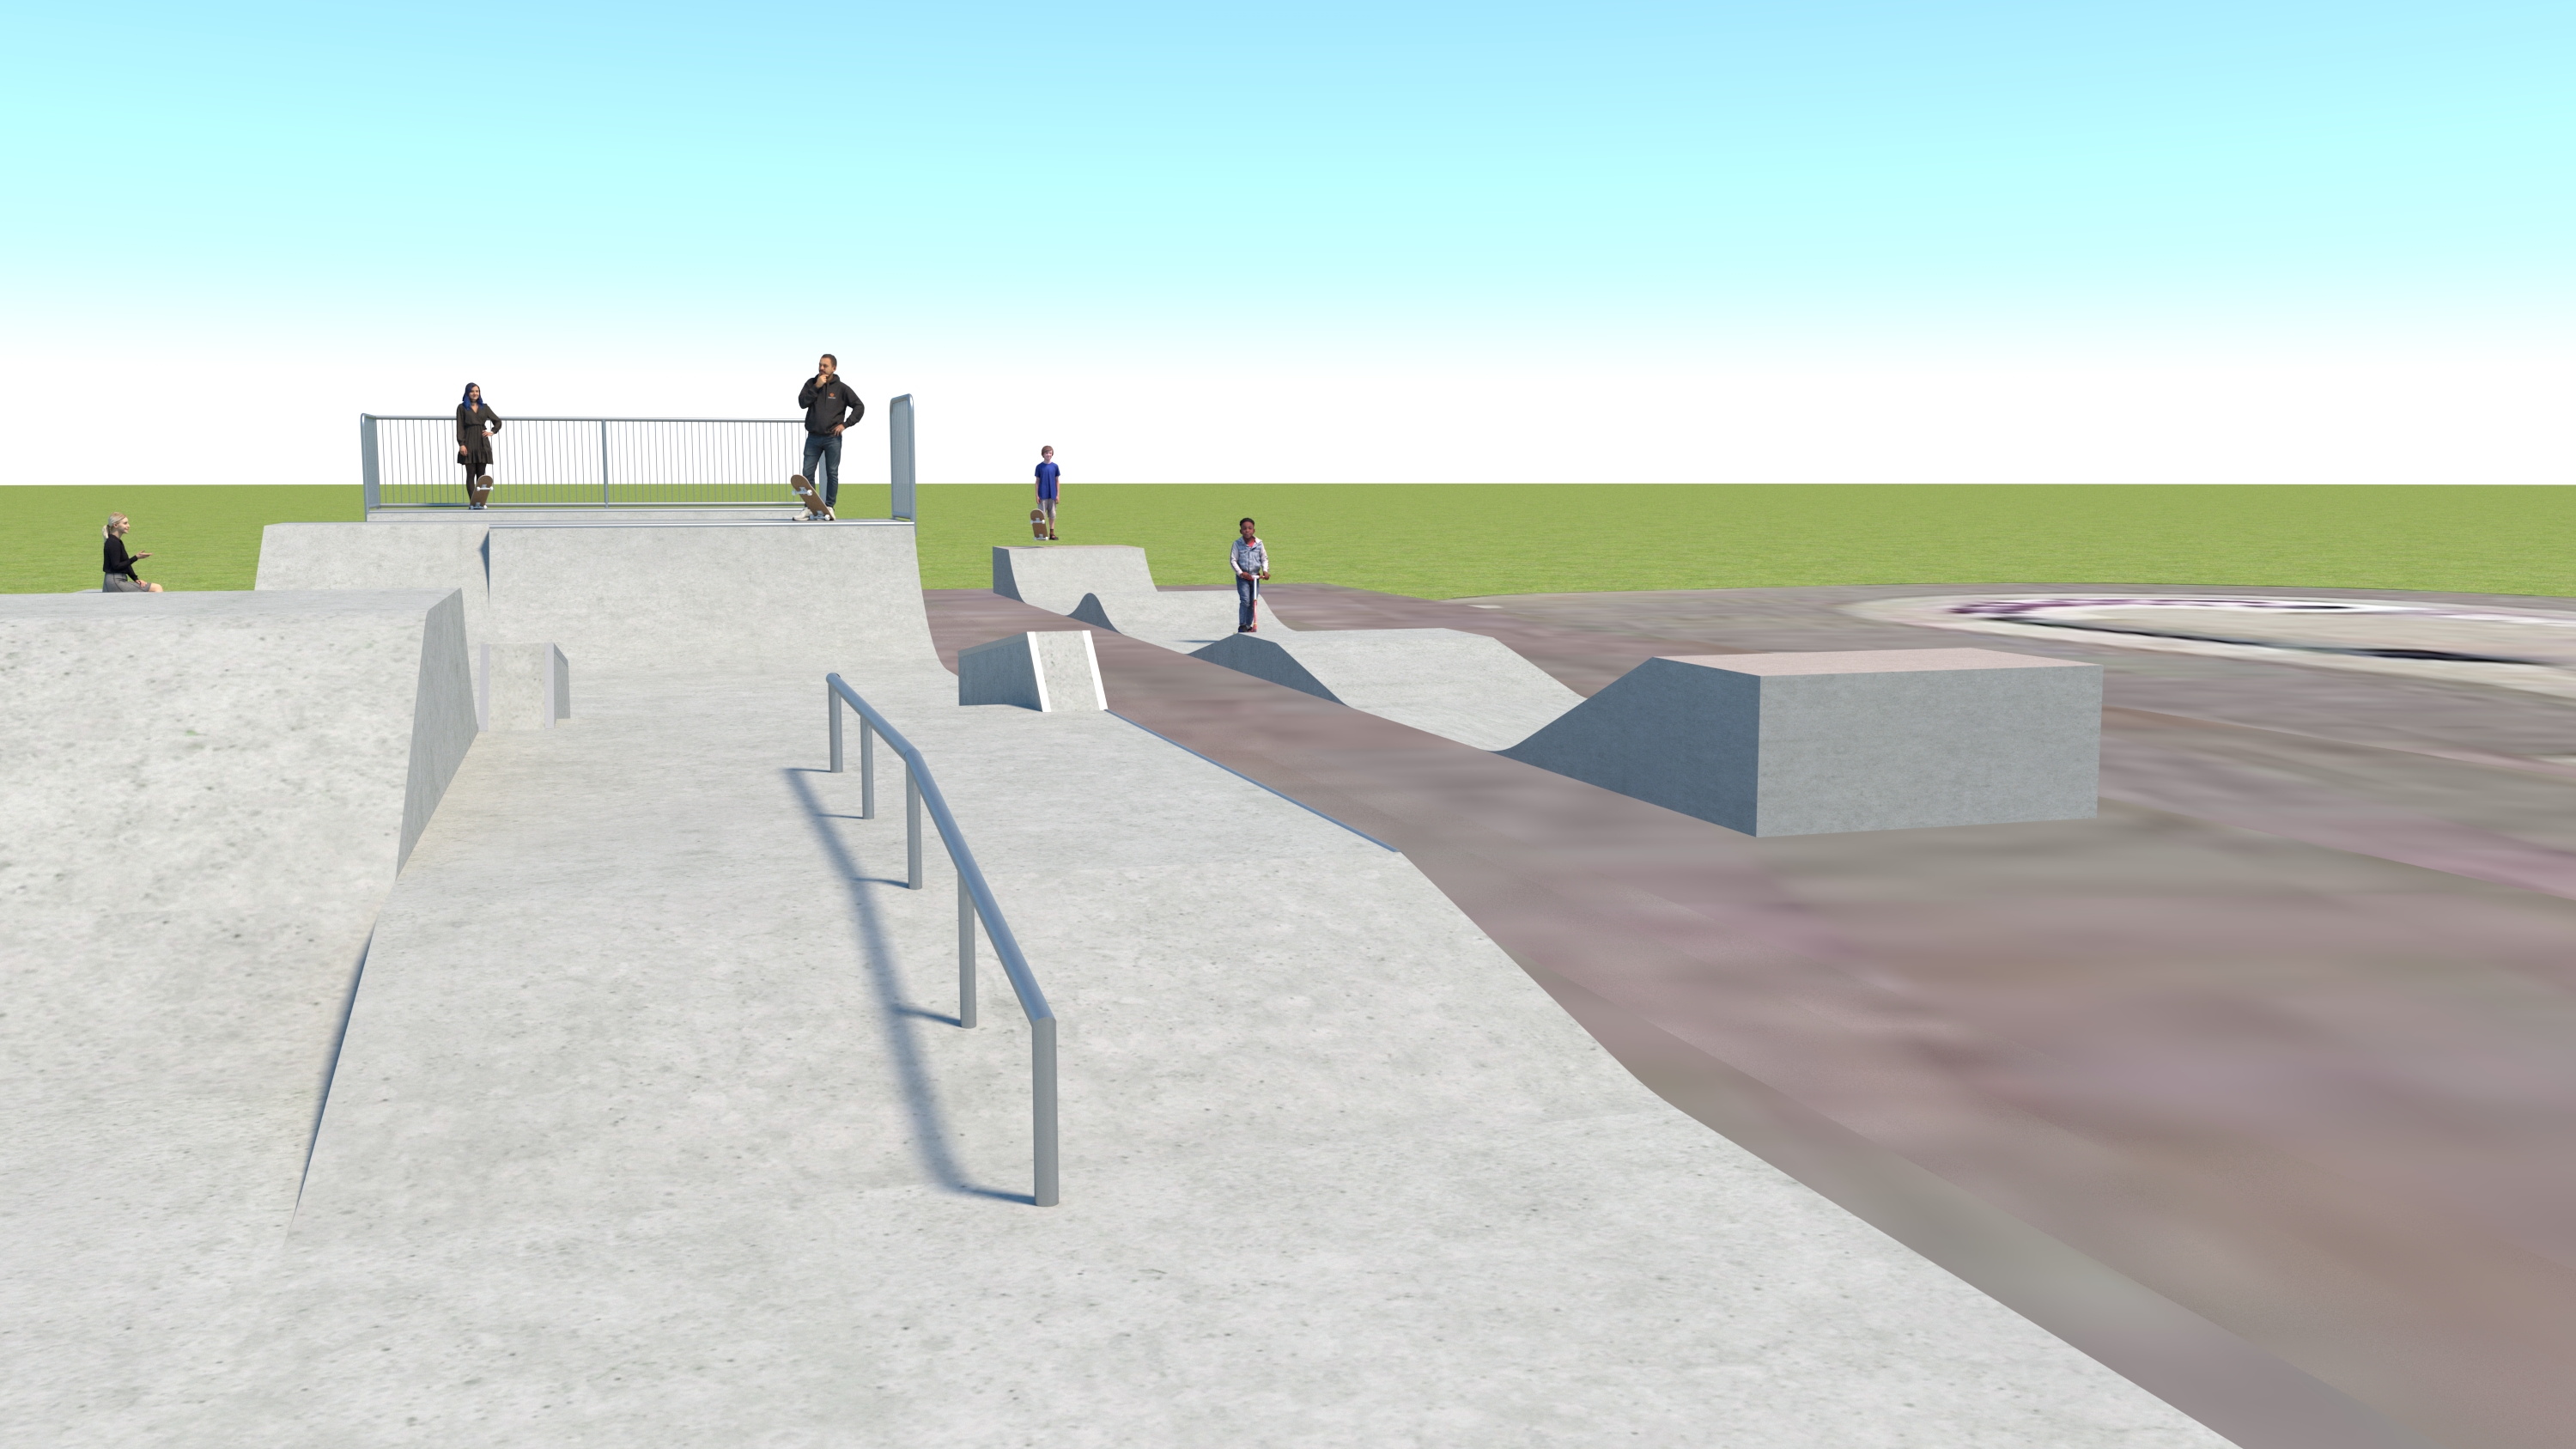 Concept image of benches and ramps Spa Road skatepark design